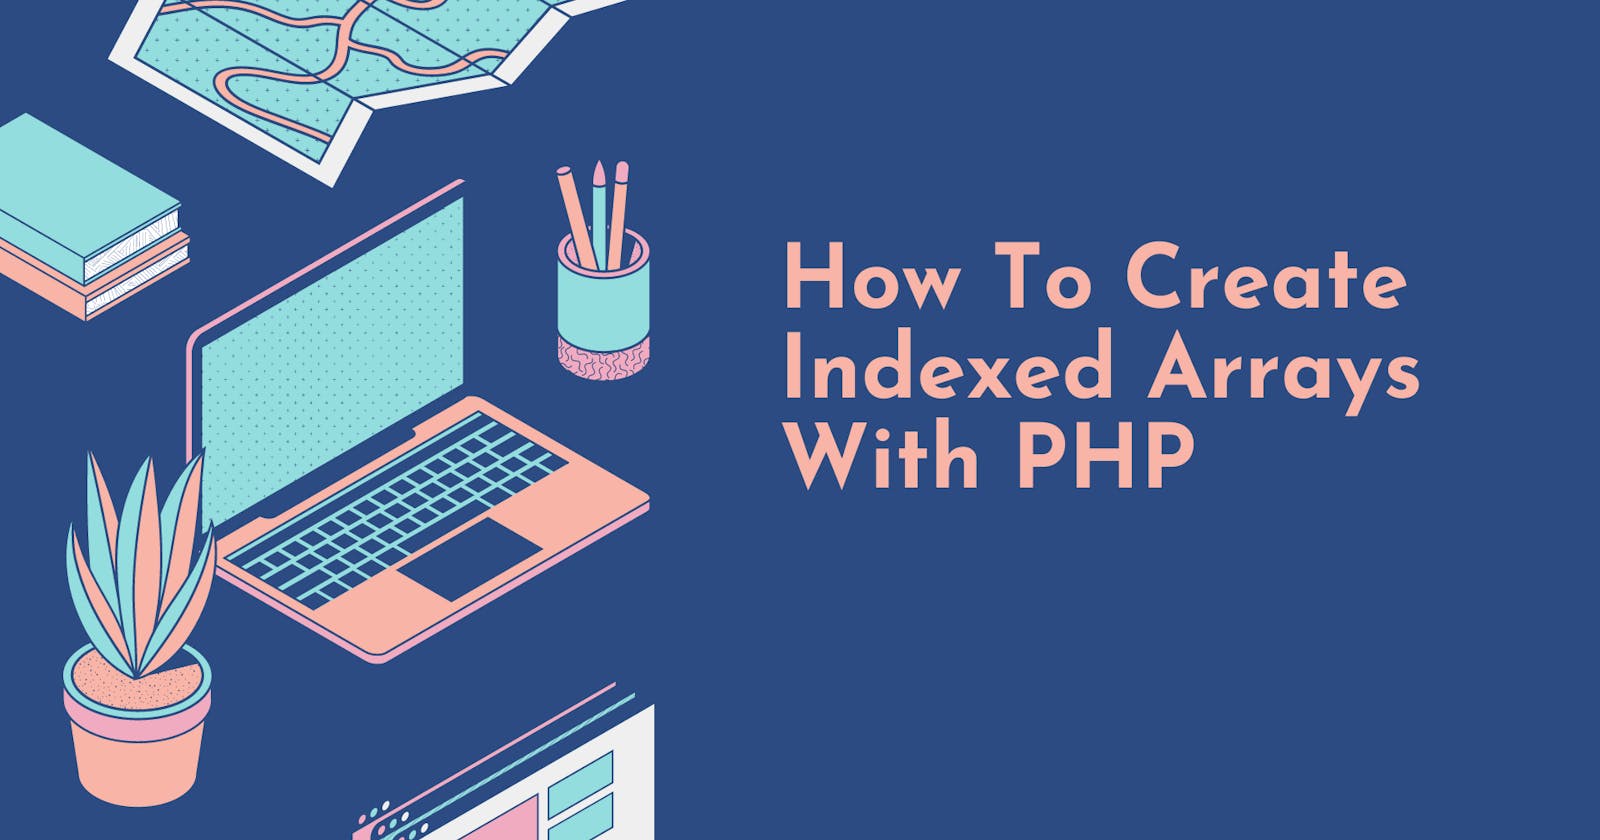 How To Create Indexed Arrays With PHP